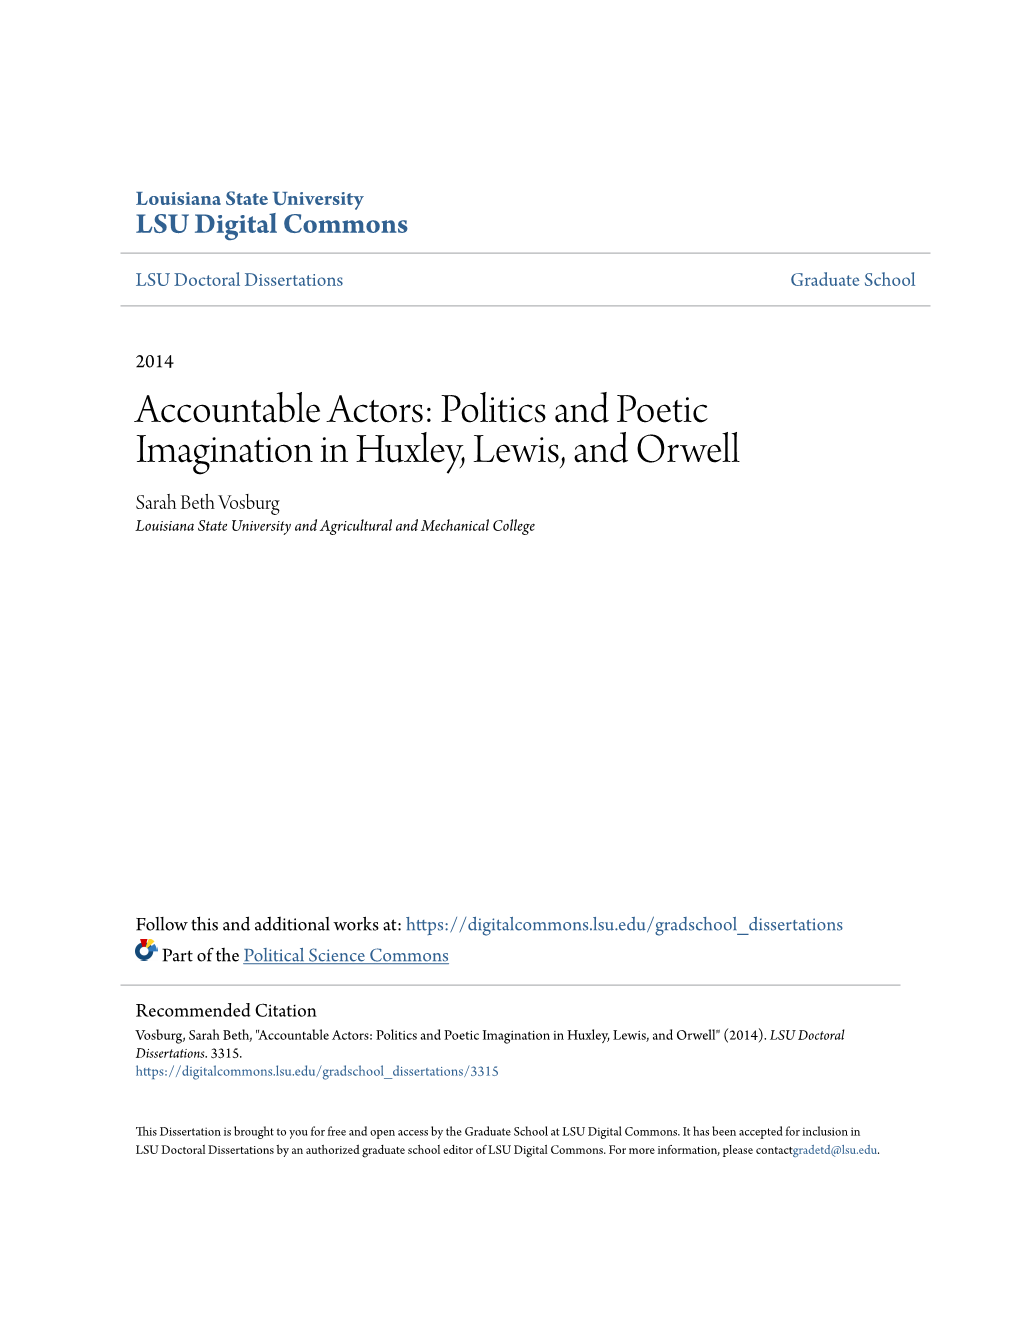 Politics and Poetic Imagination in Huxley, Lewis, and Orwell Sarah Beth Vosburg Louisiana State University and Agricultural and Mechanical College